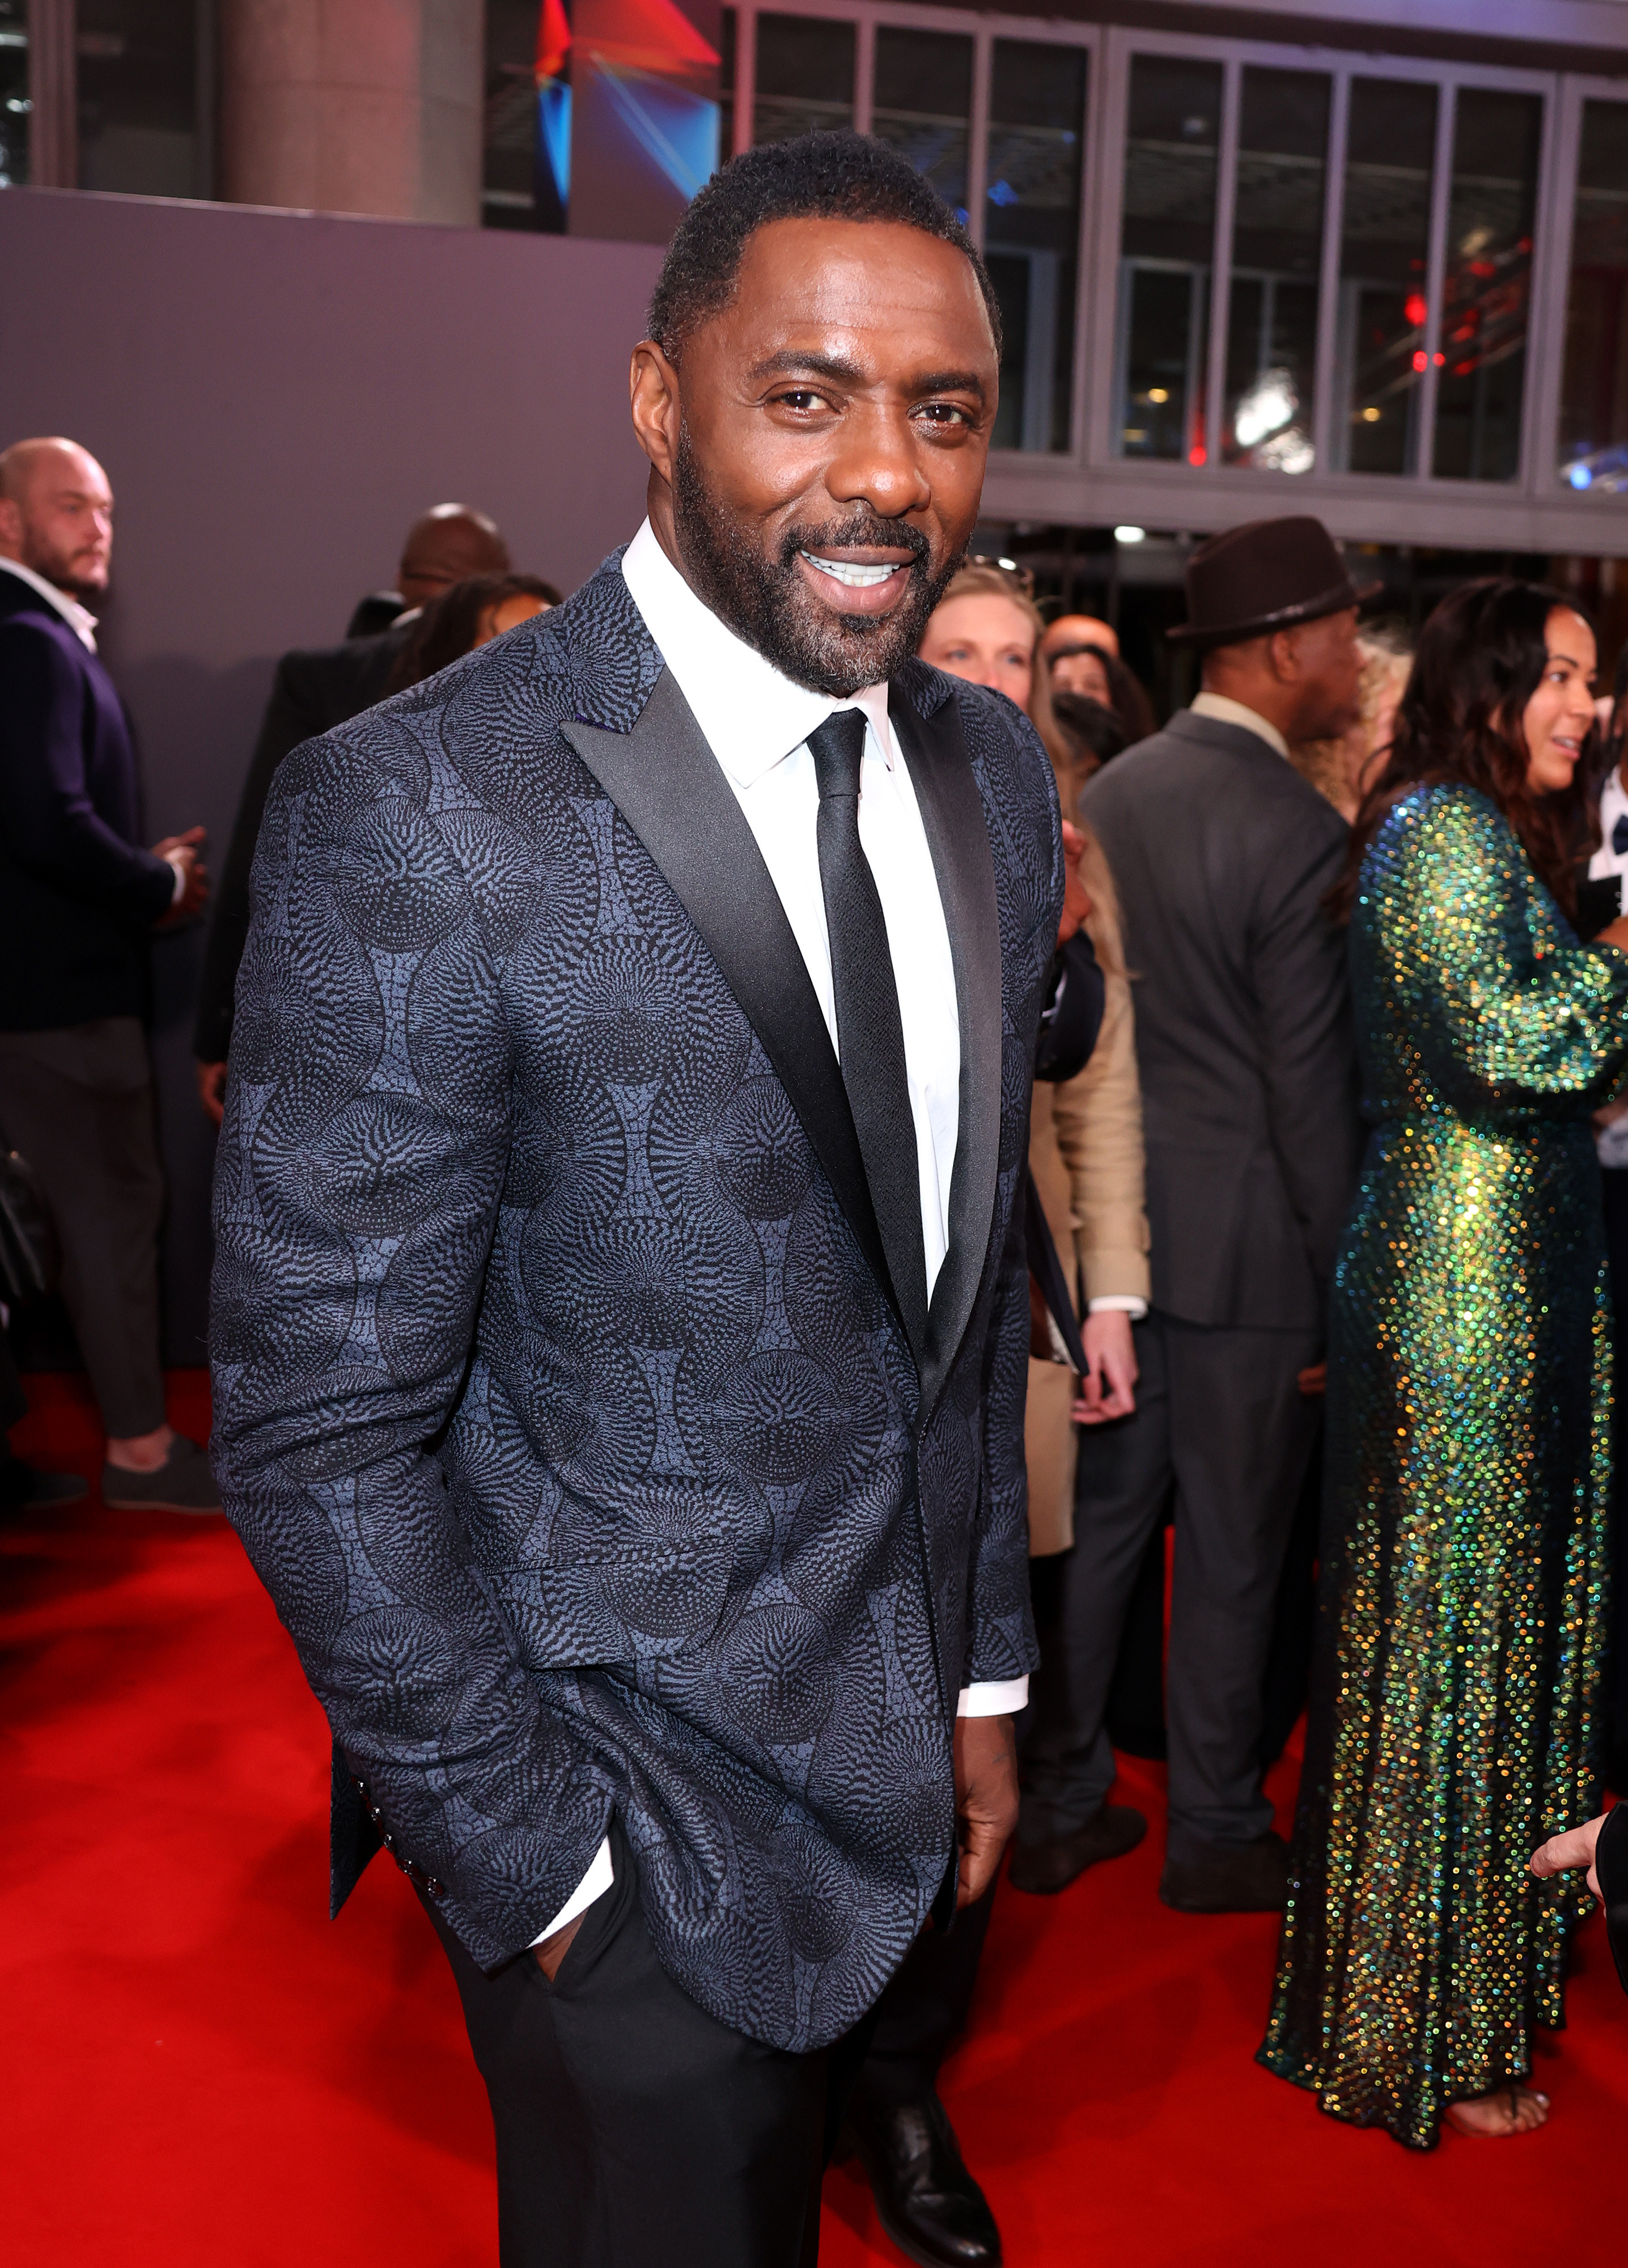 Idris Elba attends the BFI London Film Festival for the premiere of &quot;The Harder They Fall&quot;